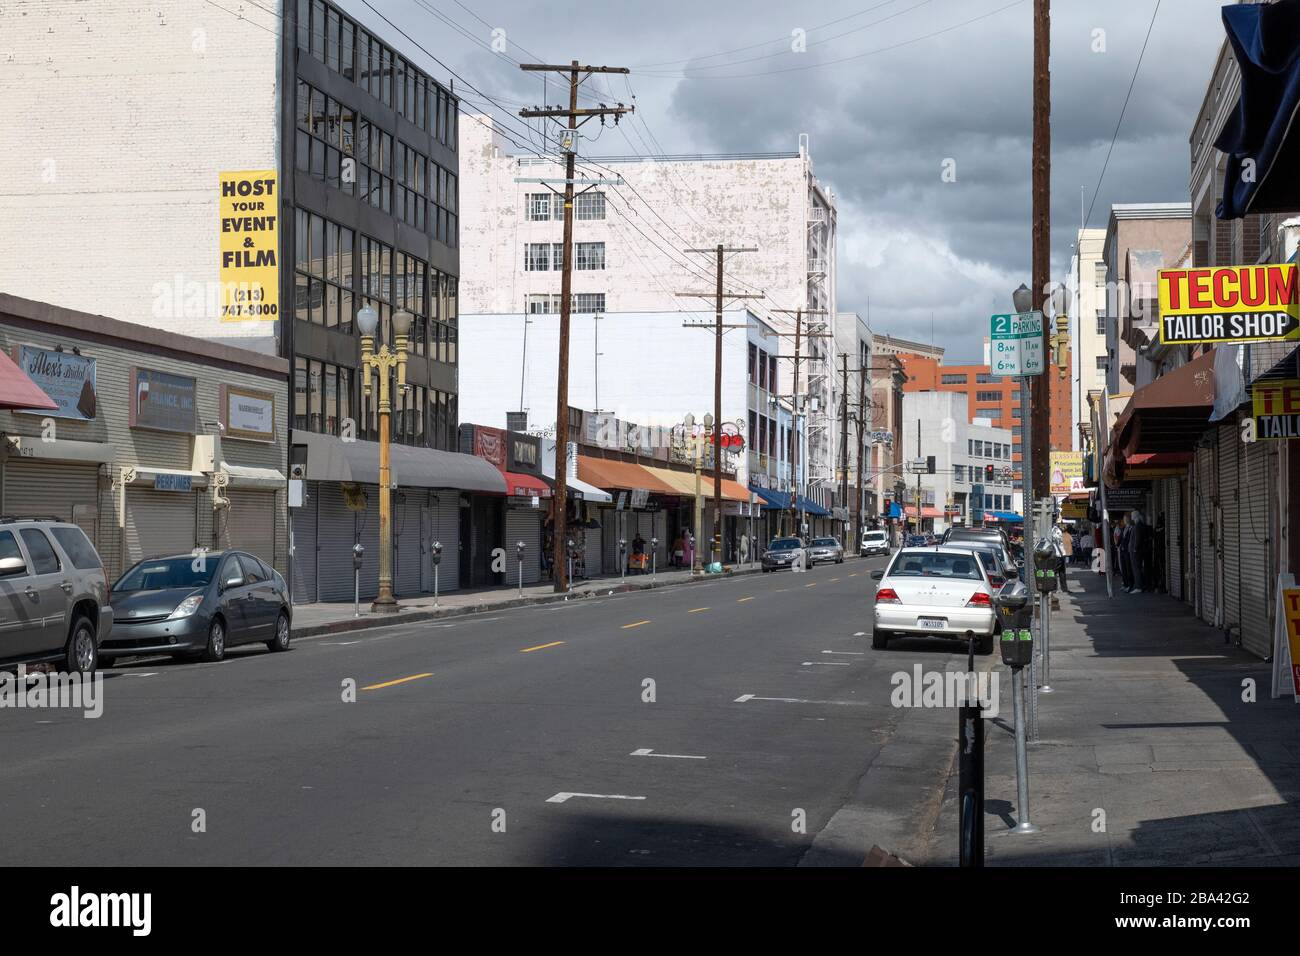 LOS ANGELES, CA/USA - MARCH 19, 2020: Streets of the Los Angeles Fashion District deserted during corona virus scare Stock Photo